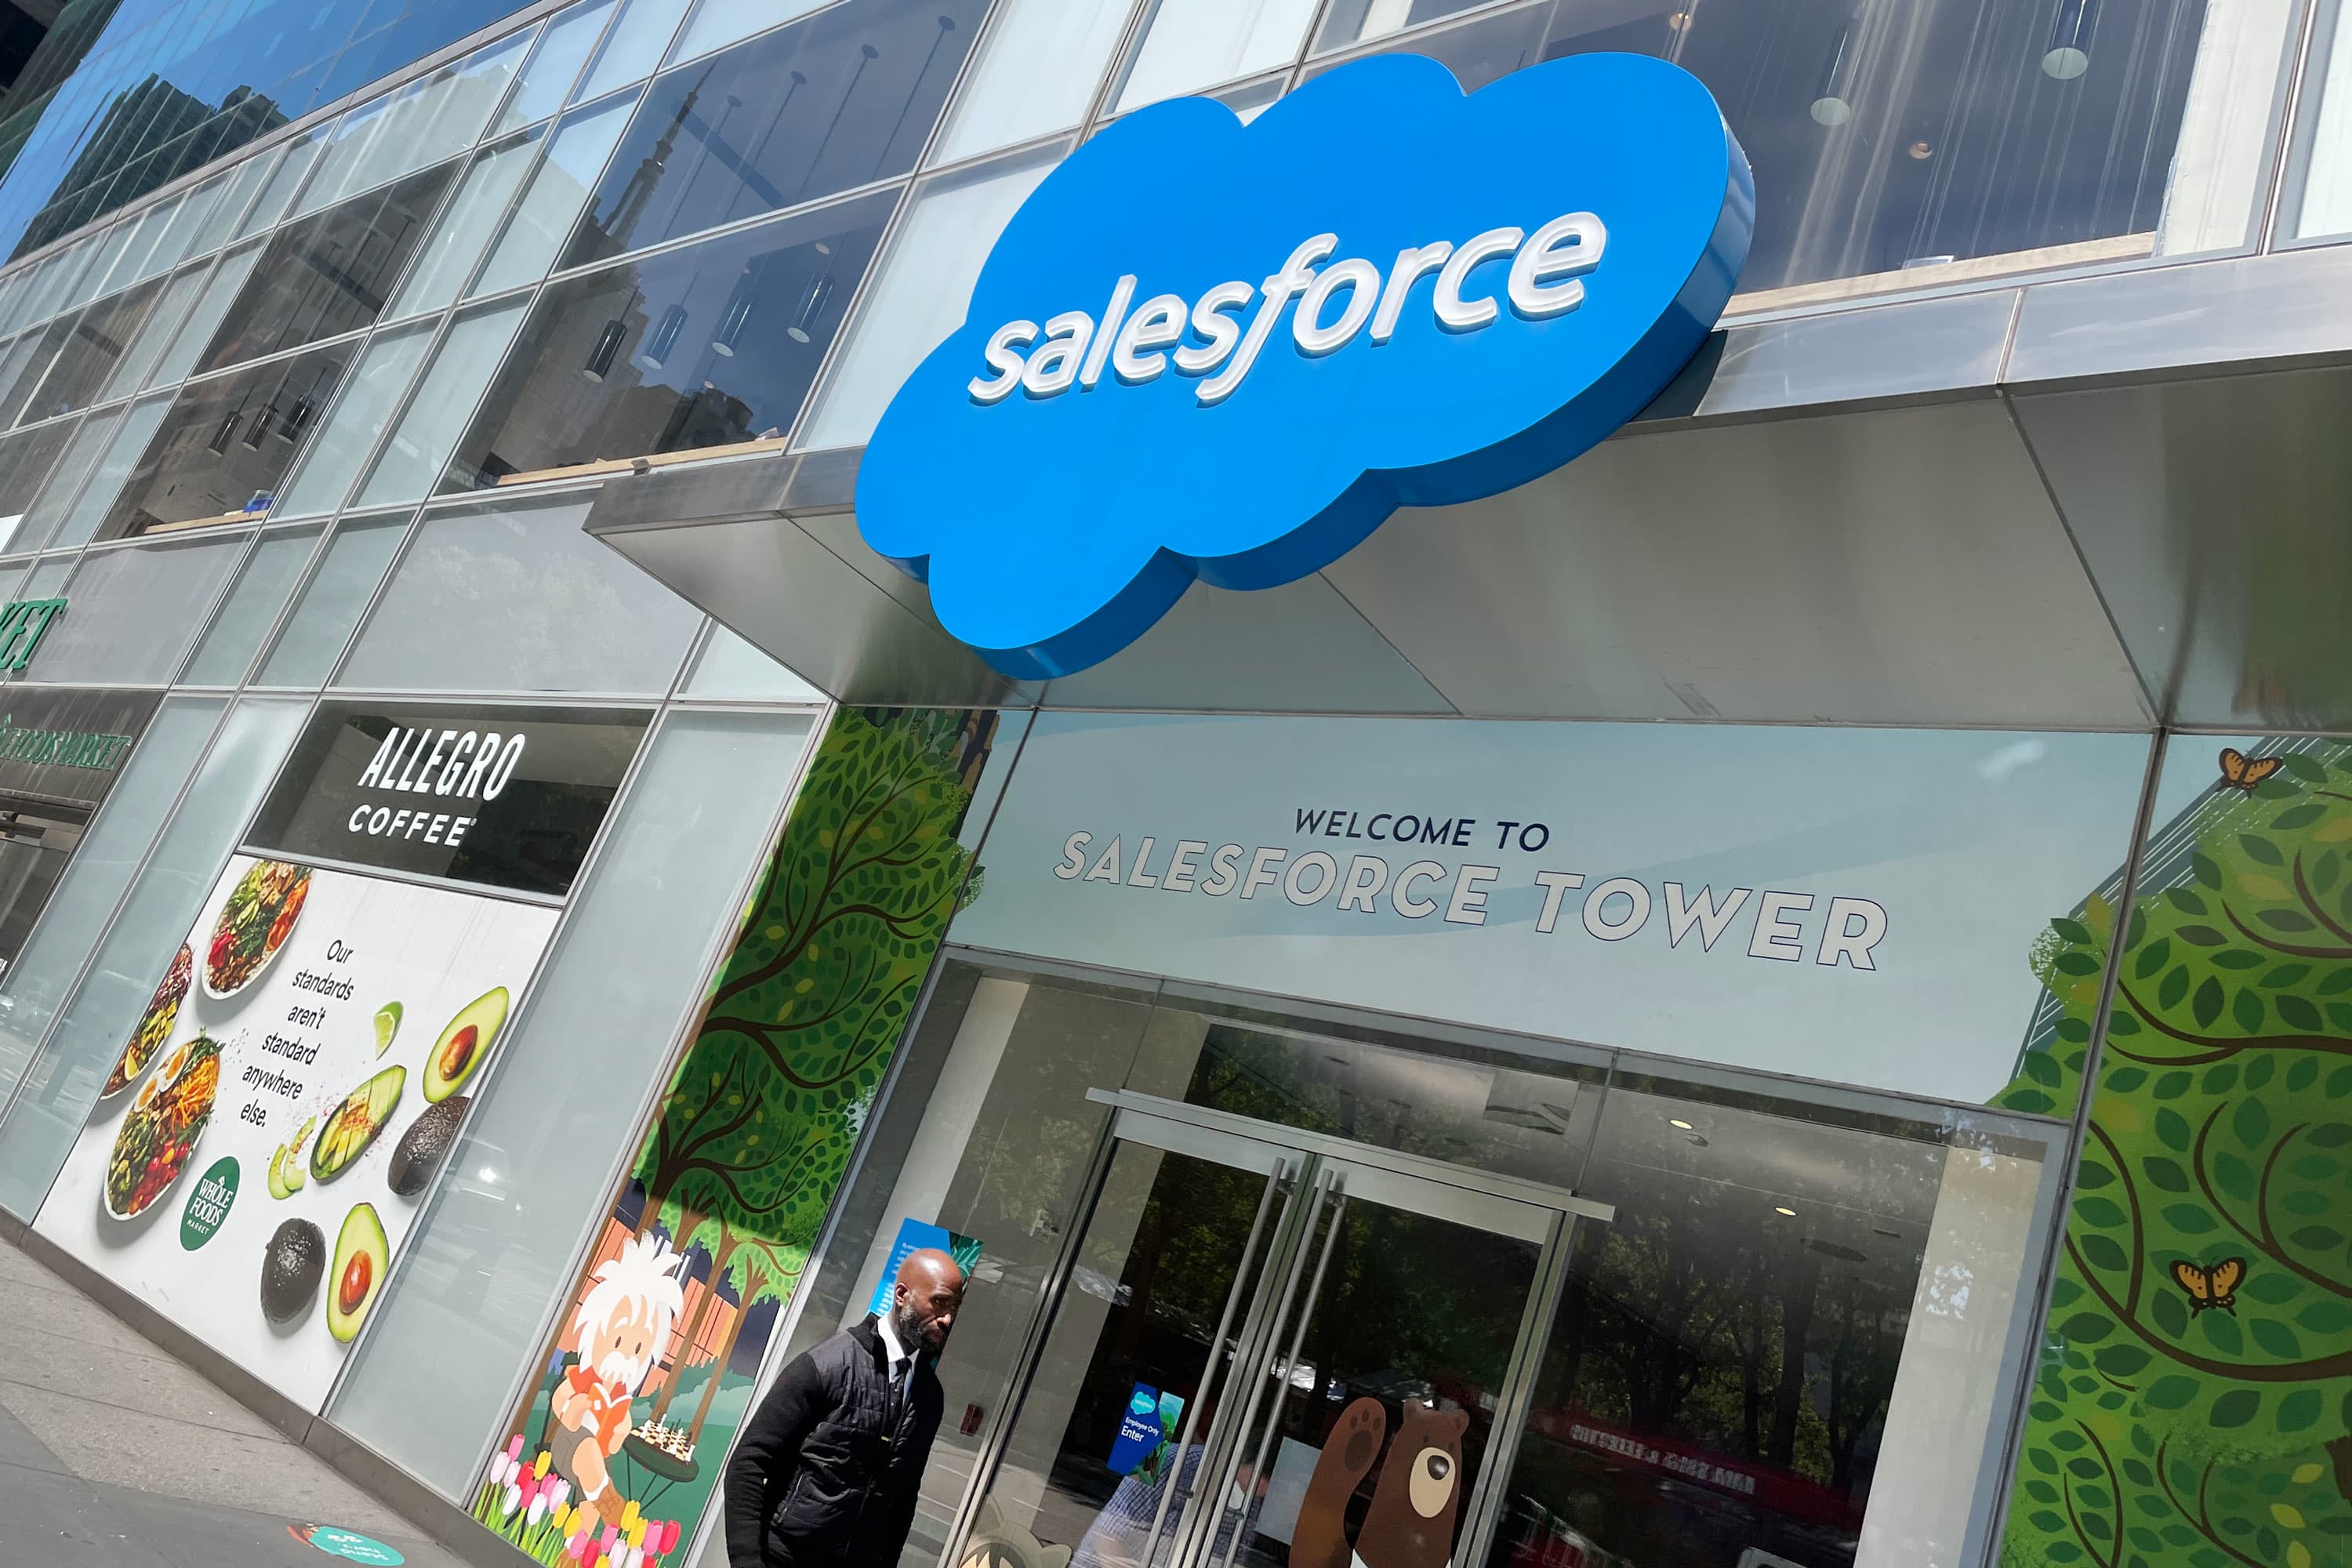 Salesforce's strong results are impressive given activist pressure, Wall Street analysts say